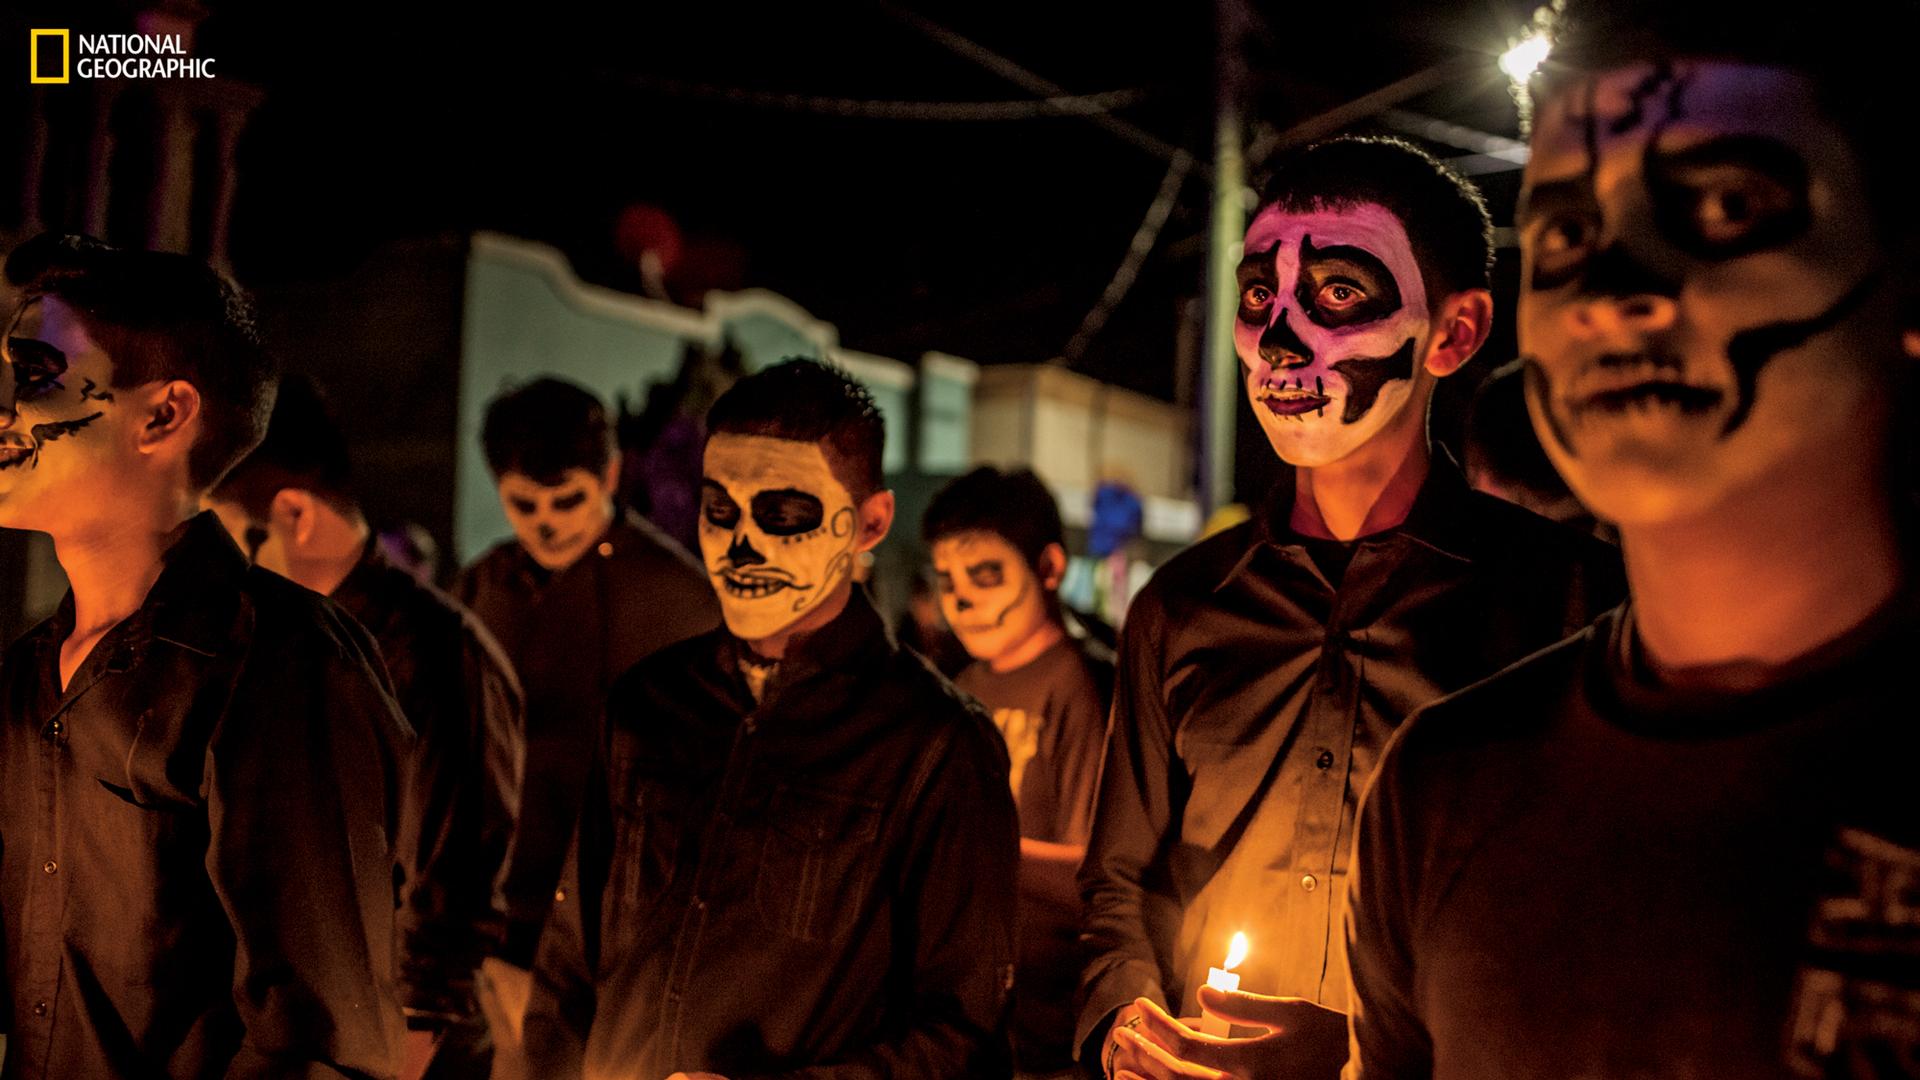 Day of the Dead holiday